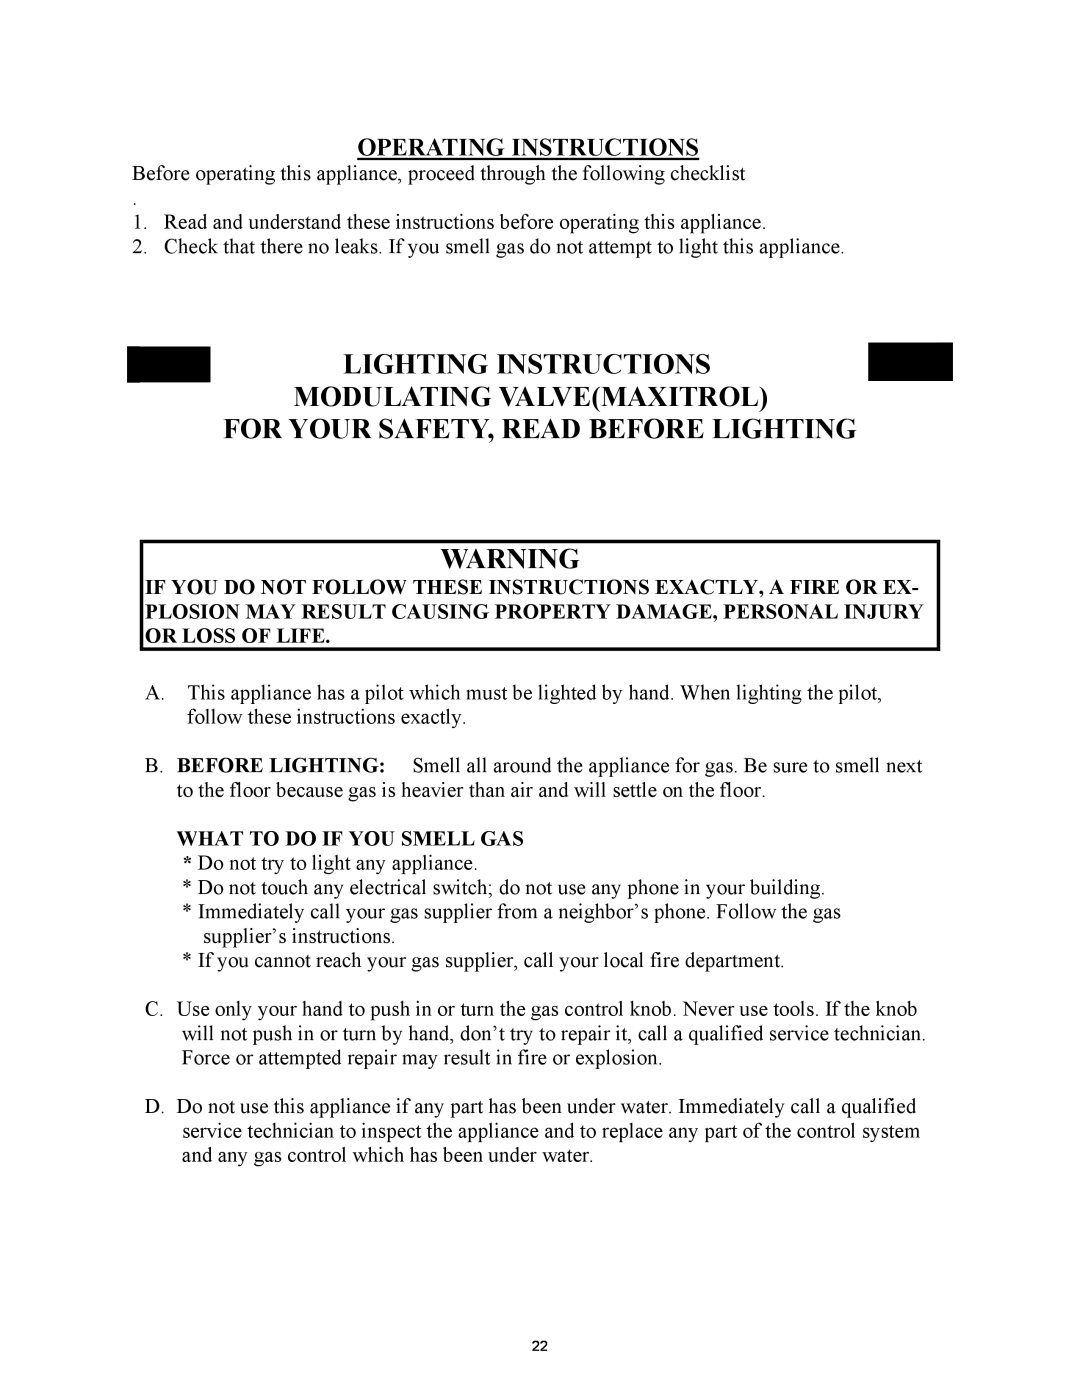 New Buck Corporation 1110 manual Lighting Instructions Modulating Valvemaxitrol, For Your Safety, Read Before Lighting 